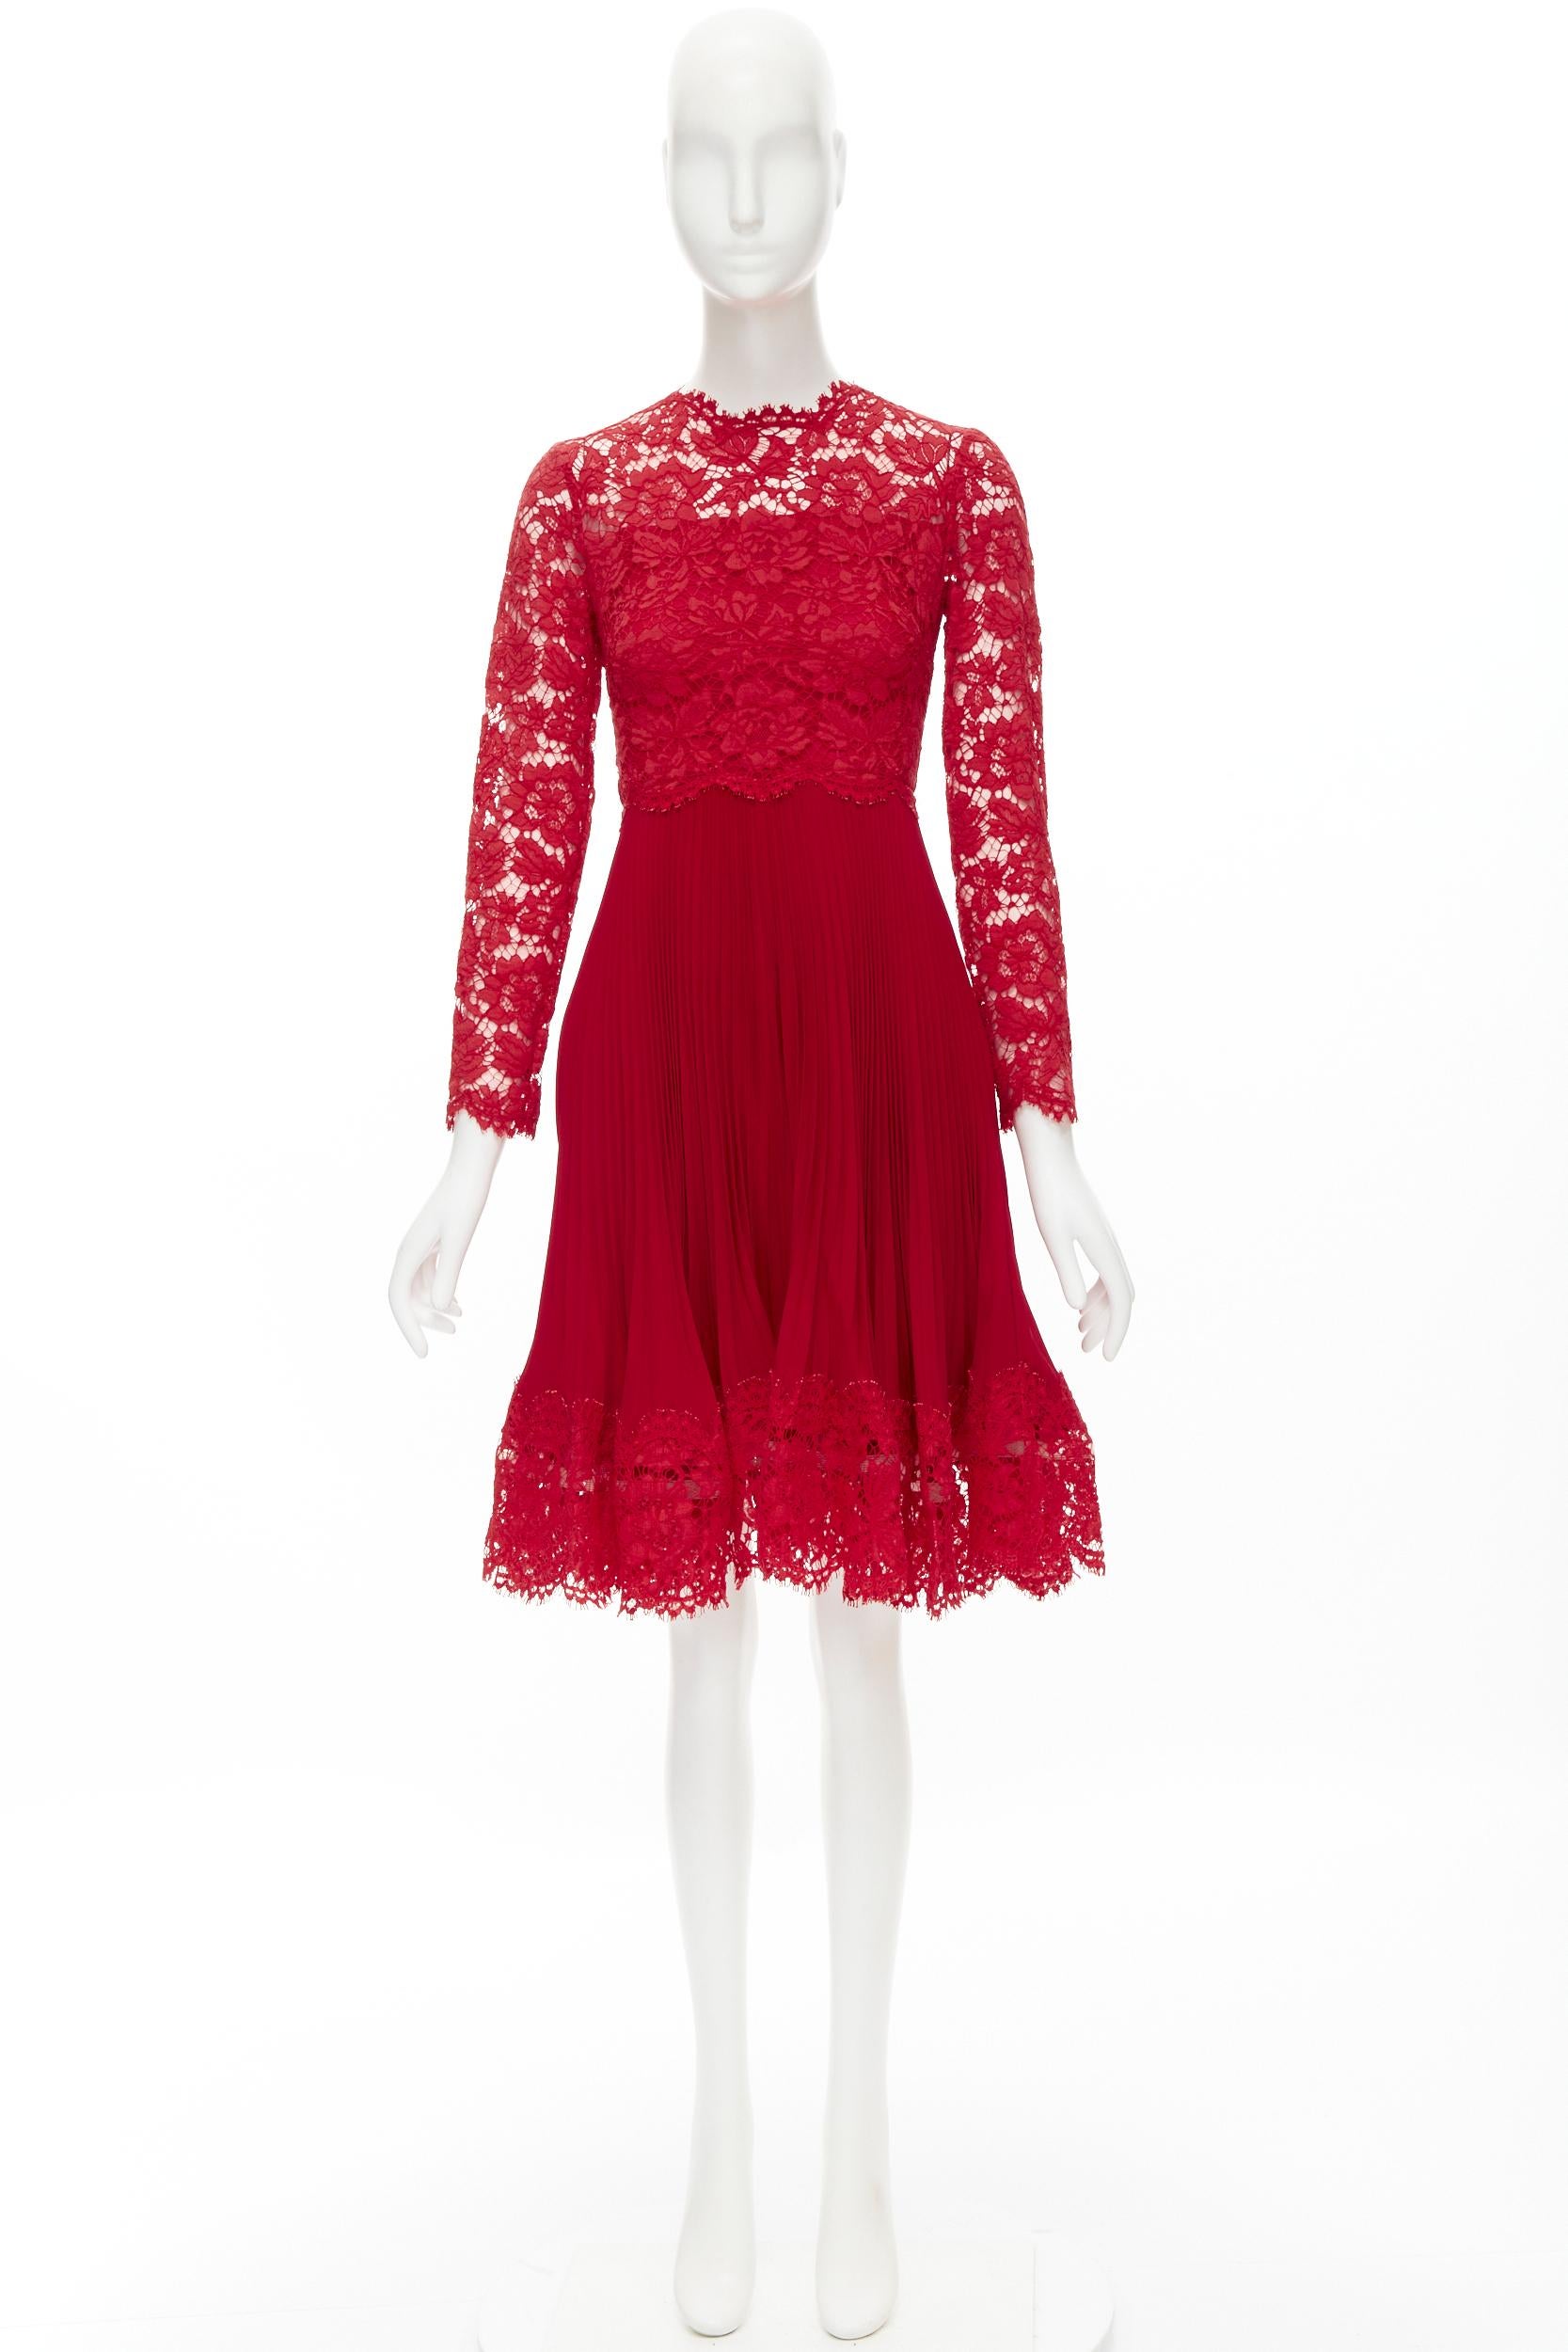 VALENTINO red floral lace knife pleat skirt cocktail dress IT38 XS For Sale 5